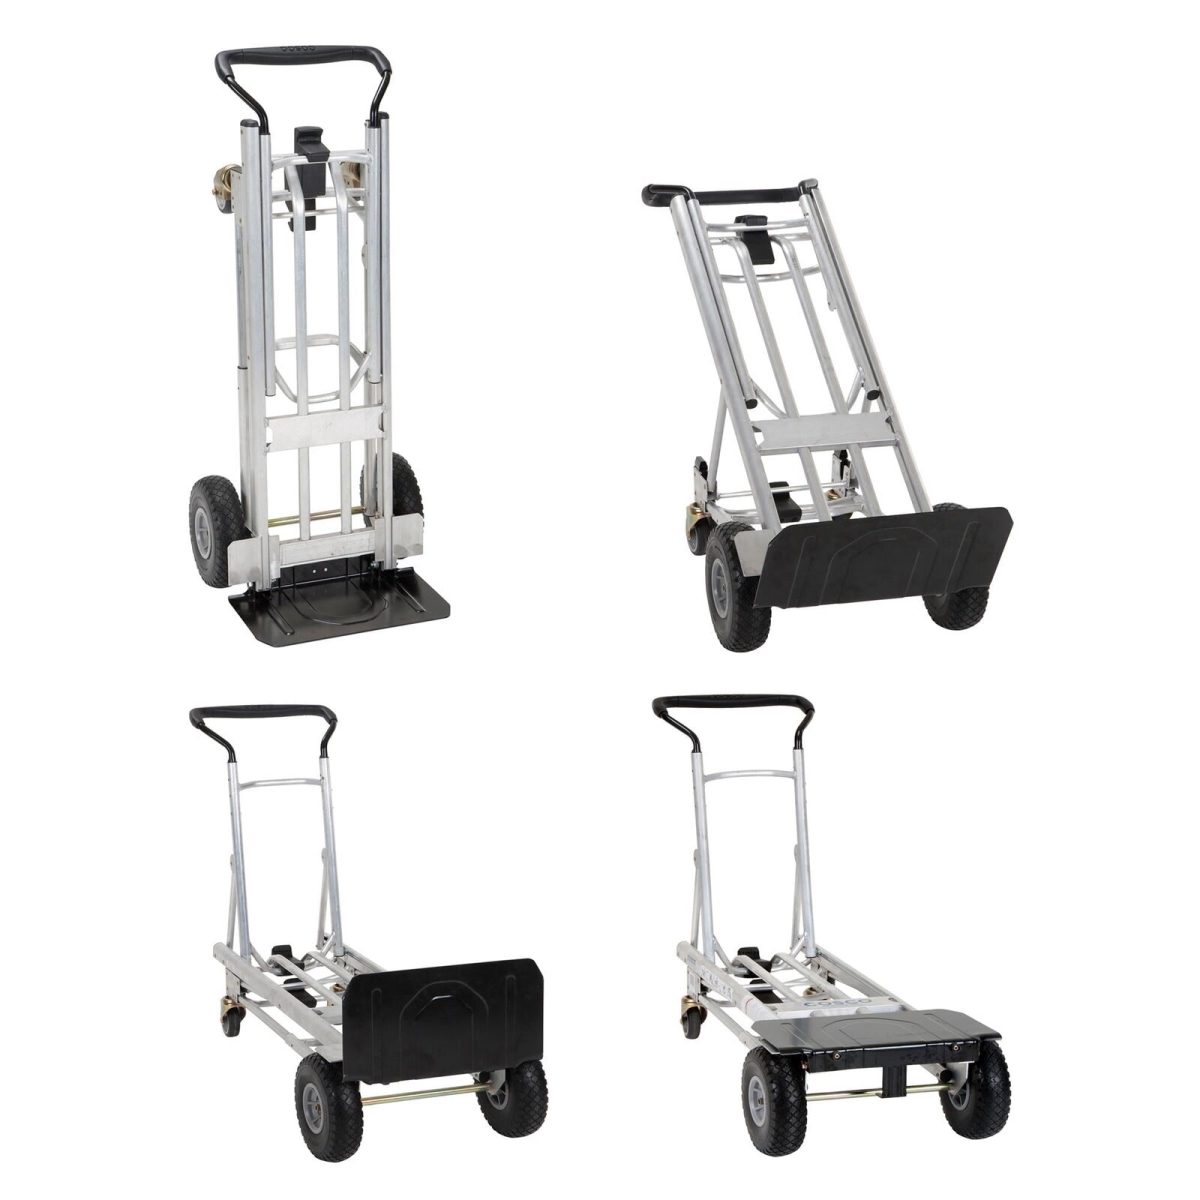 Picture of Costco CSC12323ASB1E Multi Position 4-in-1 Folding Series Hand Truck